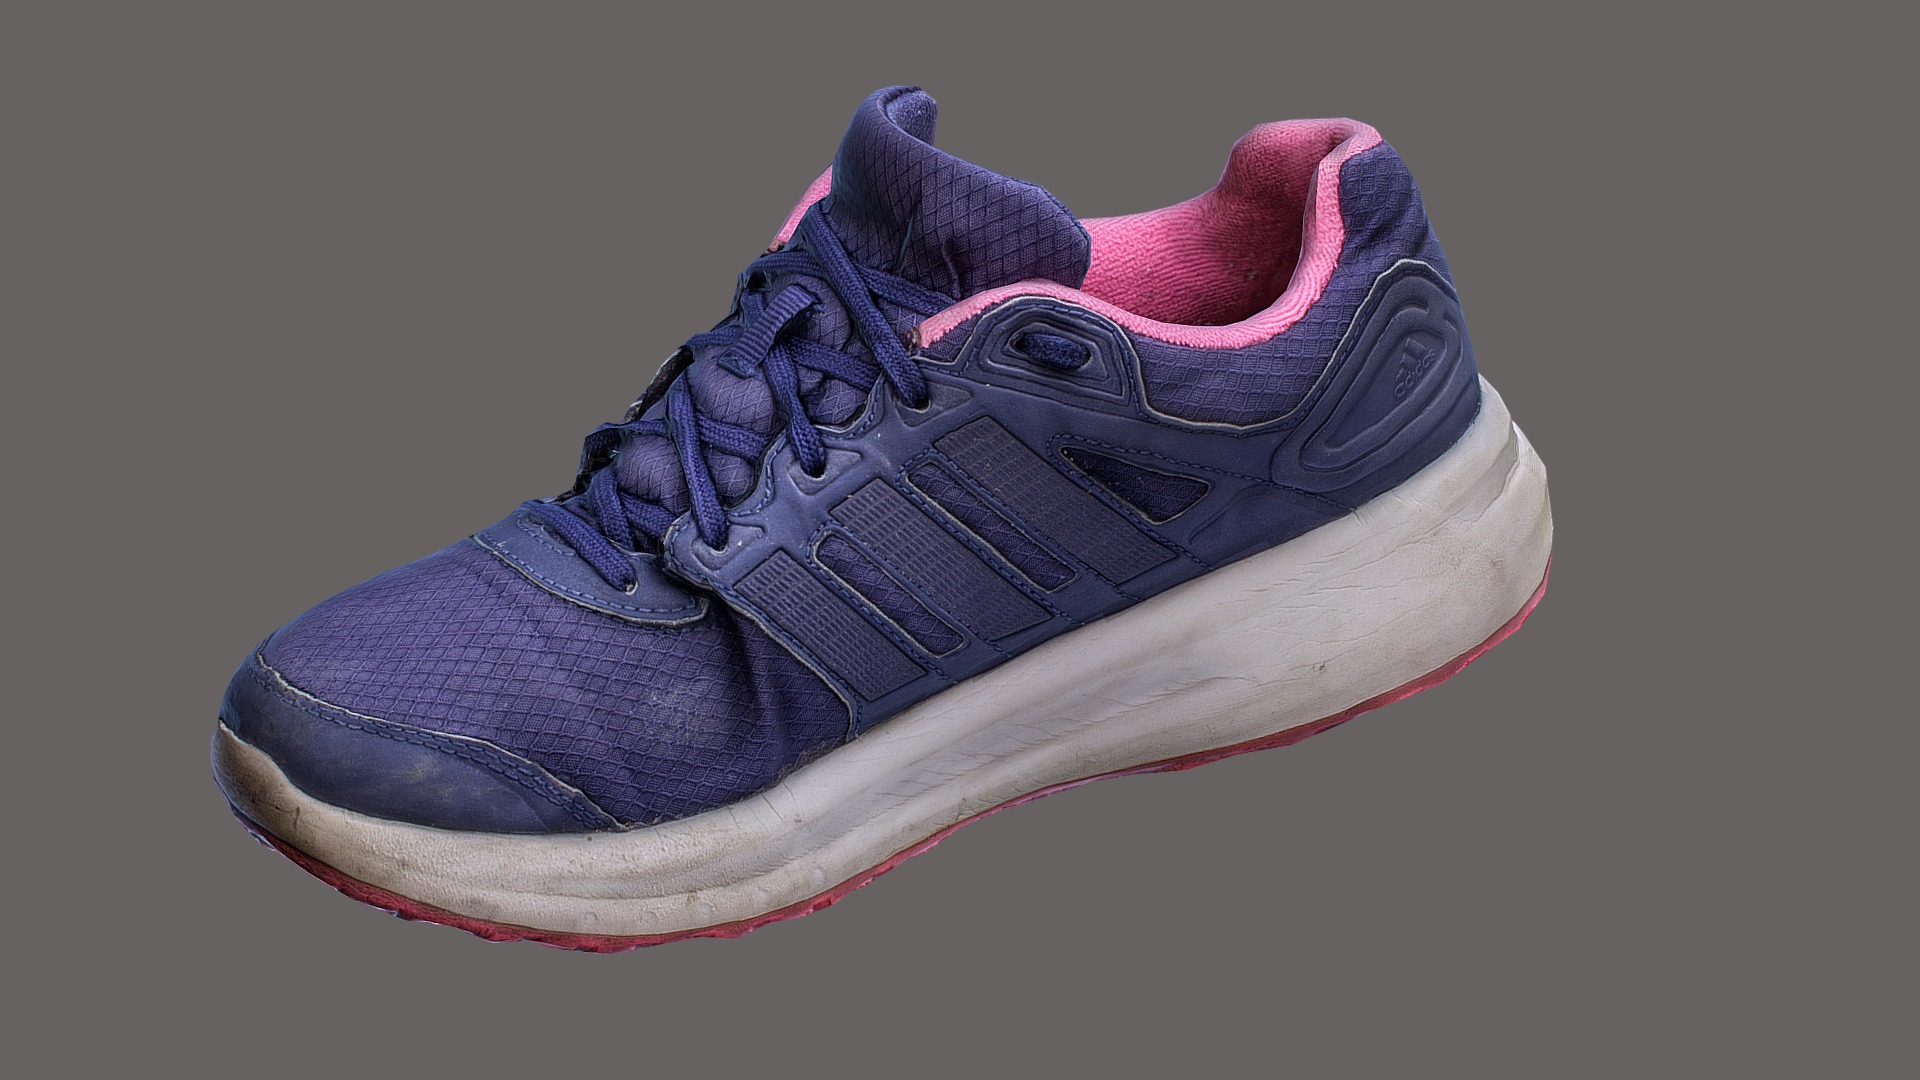 3D model Worn sneaker shoe low poly - This is a 3D model of the Worn sneaker shoe low poly. The 3D model is about a purple and white shoe.